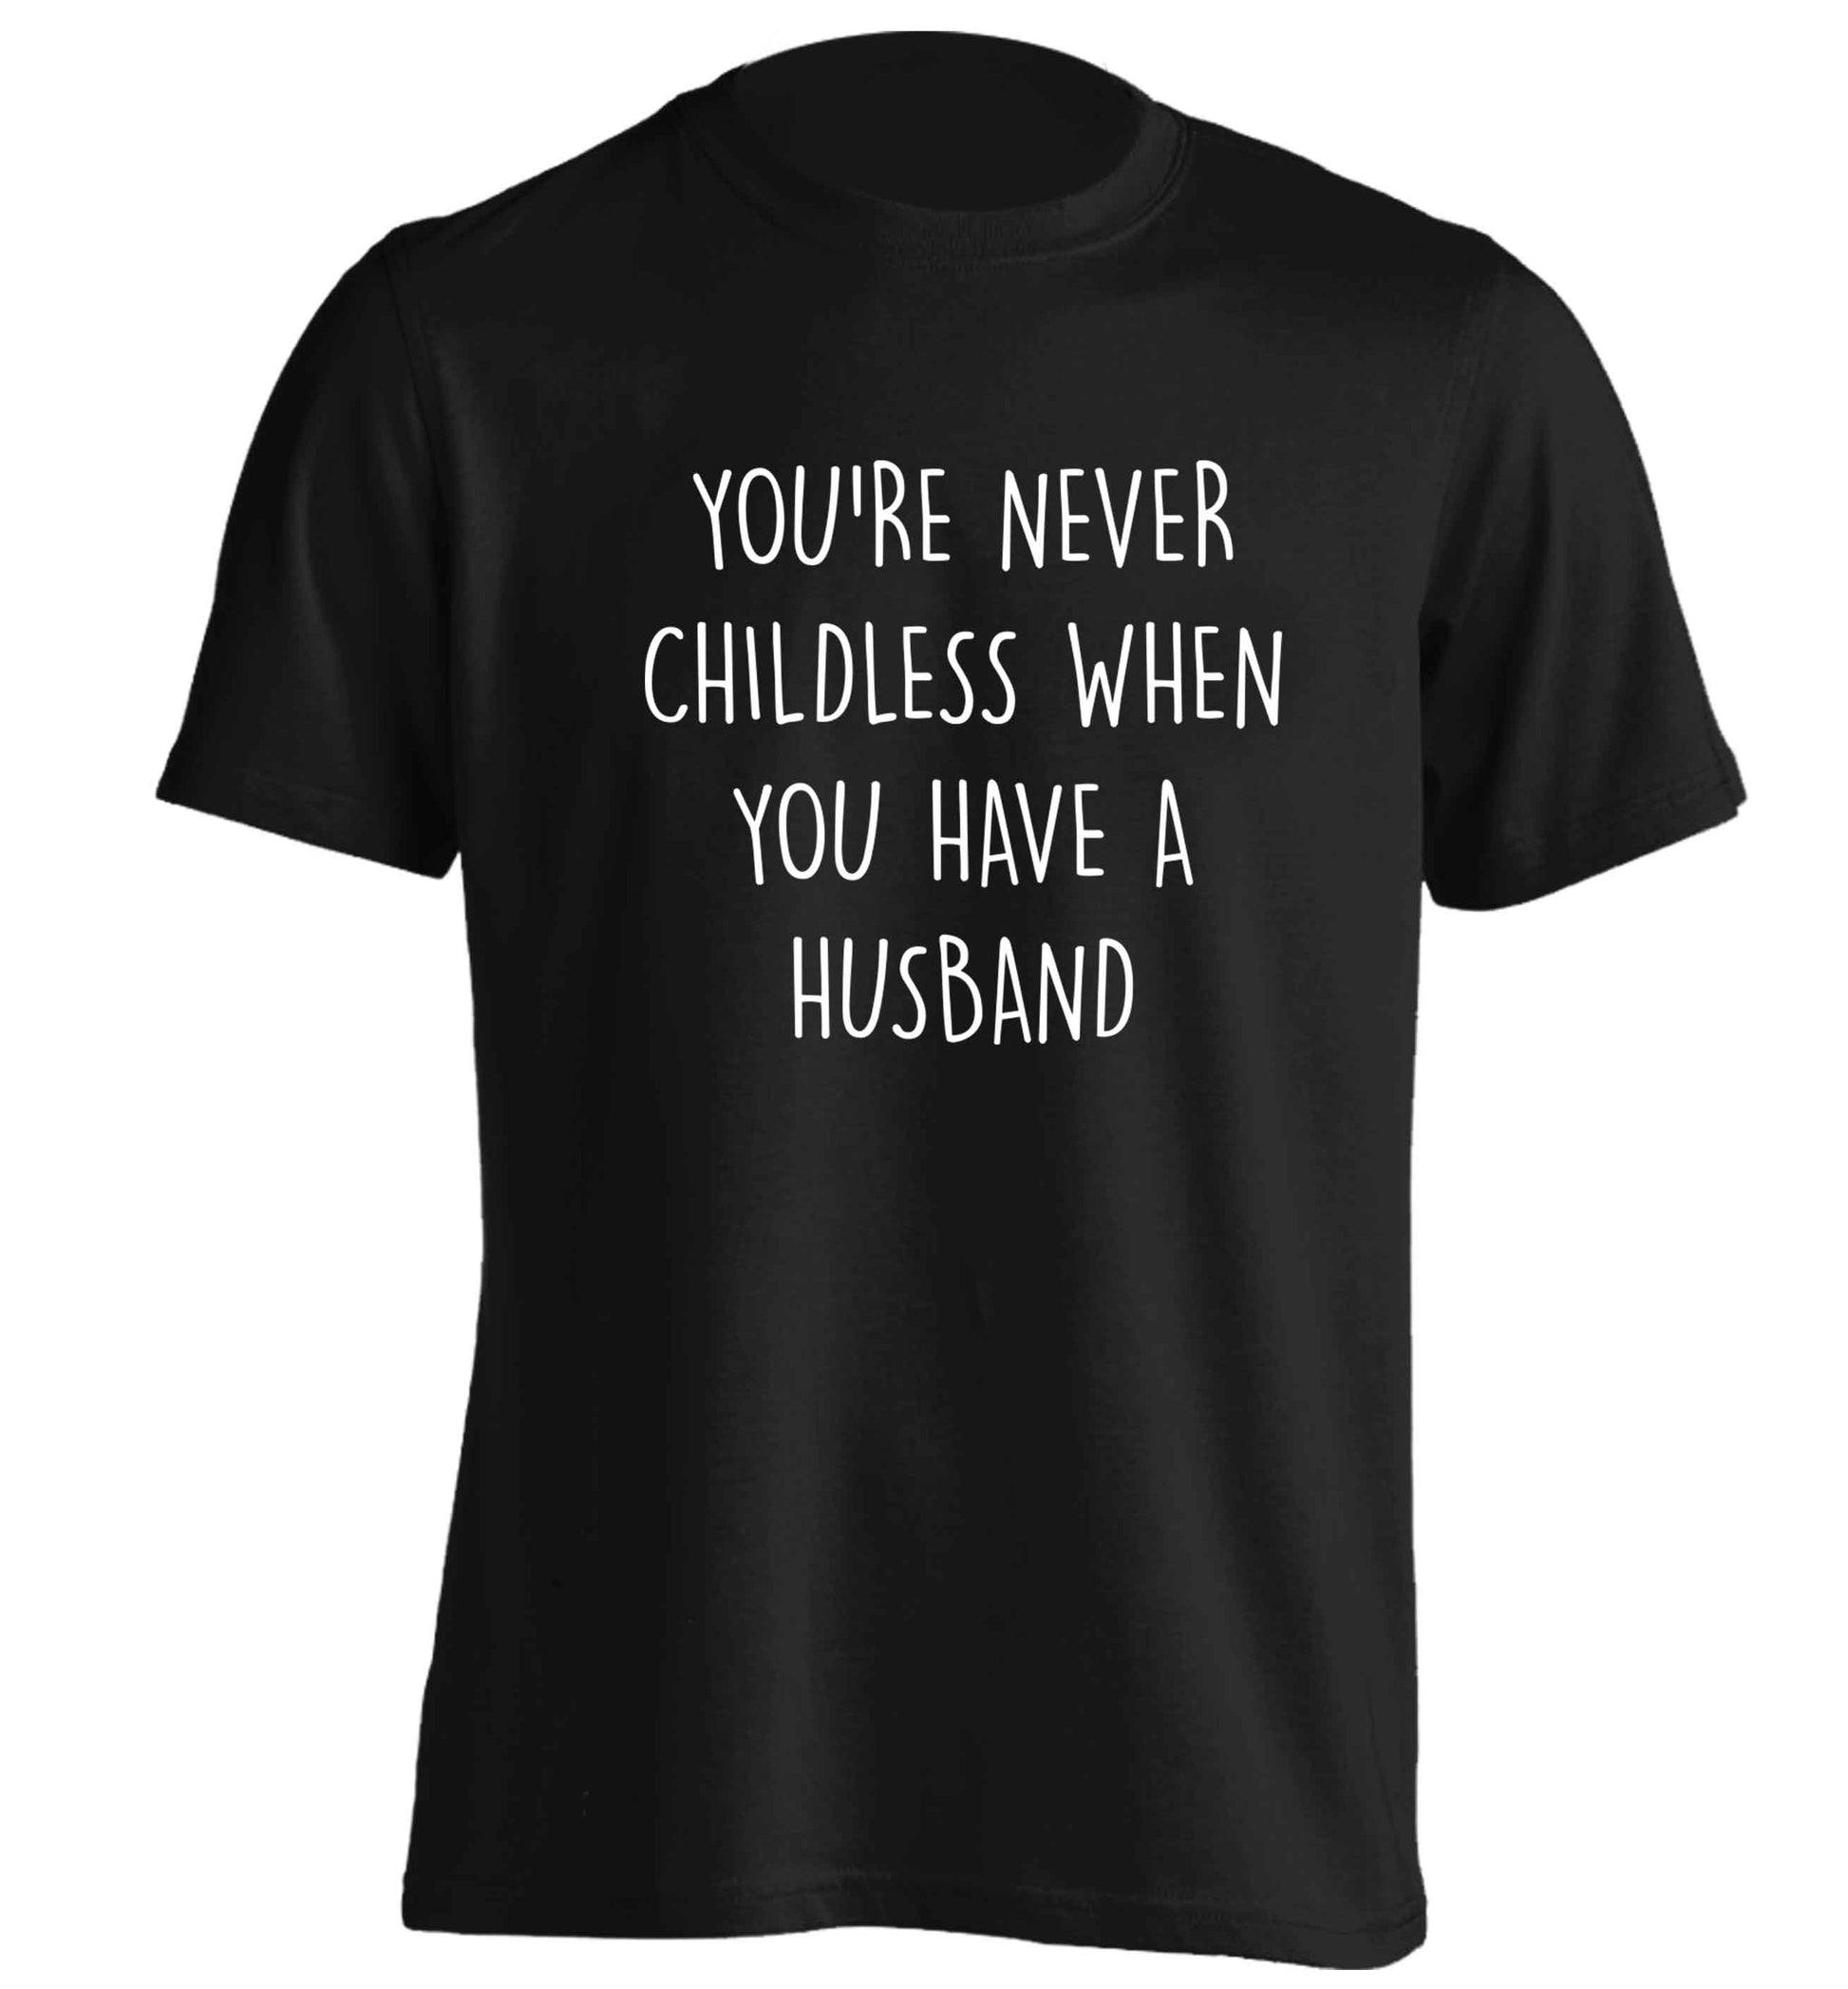 You're never childess when you have a husband adults unisex black Tshirt 2XL